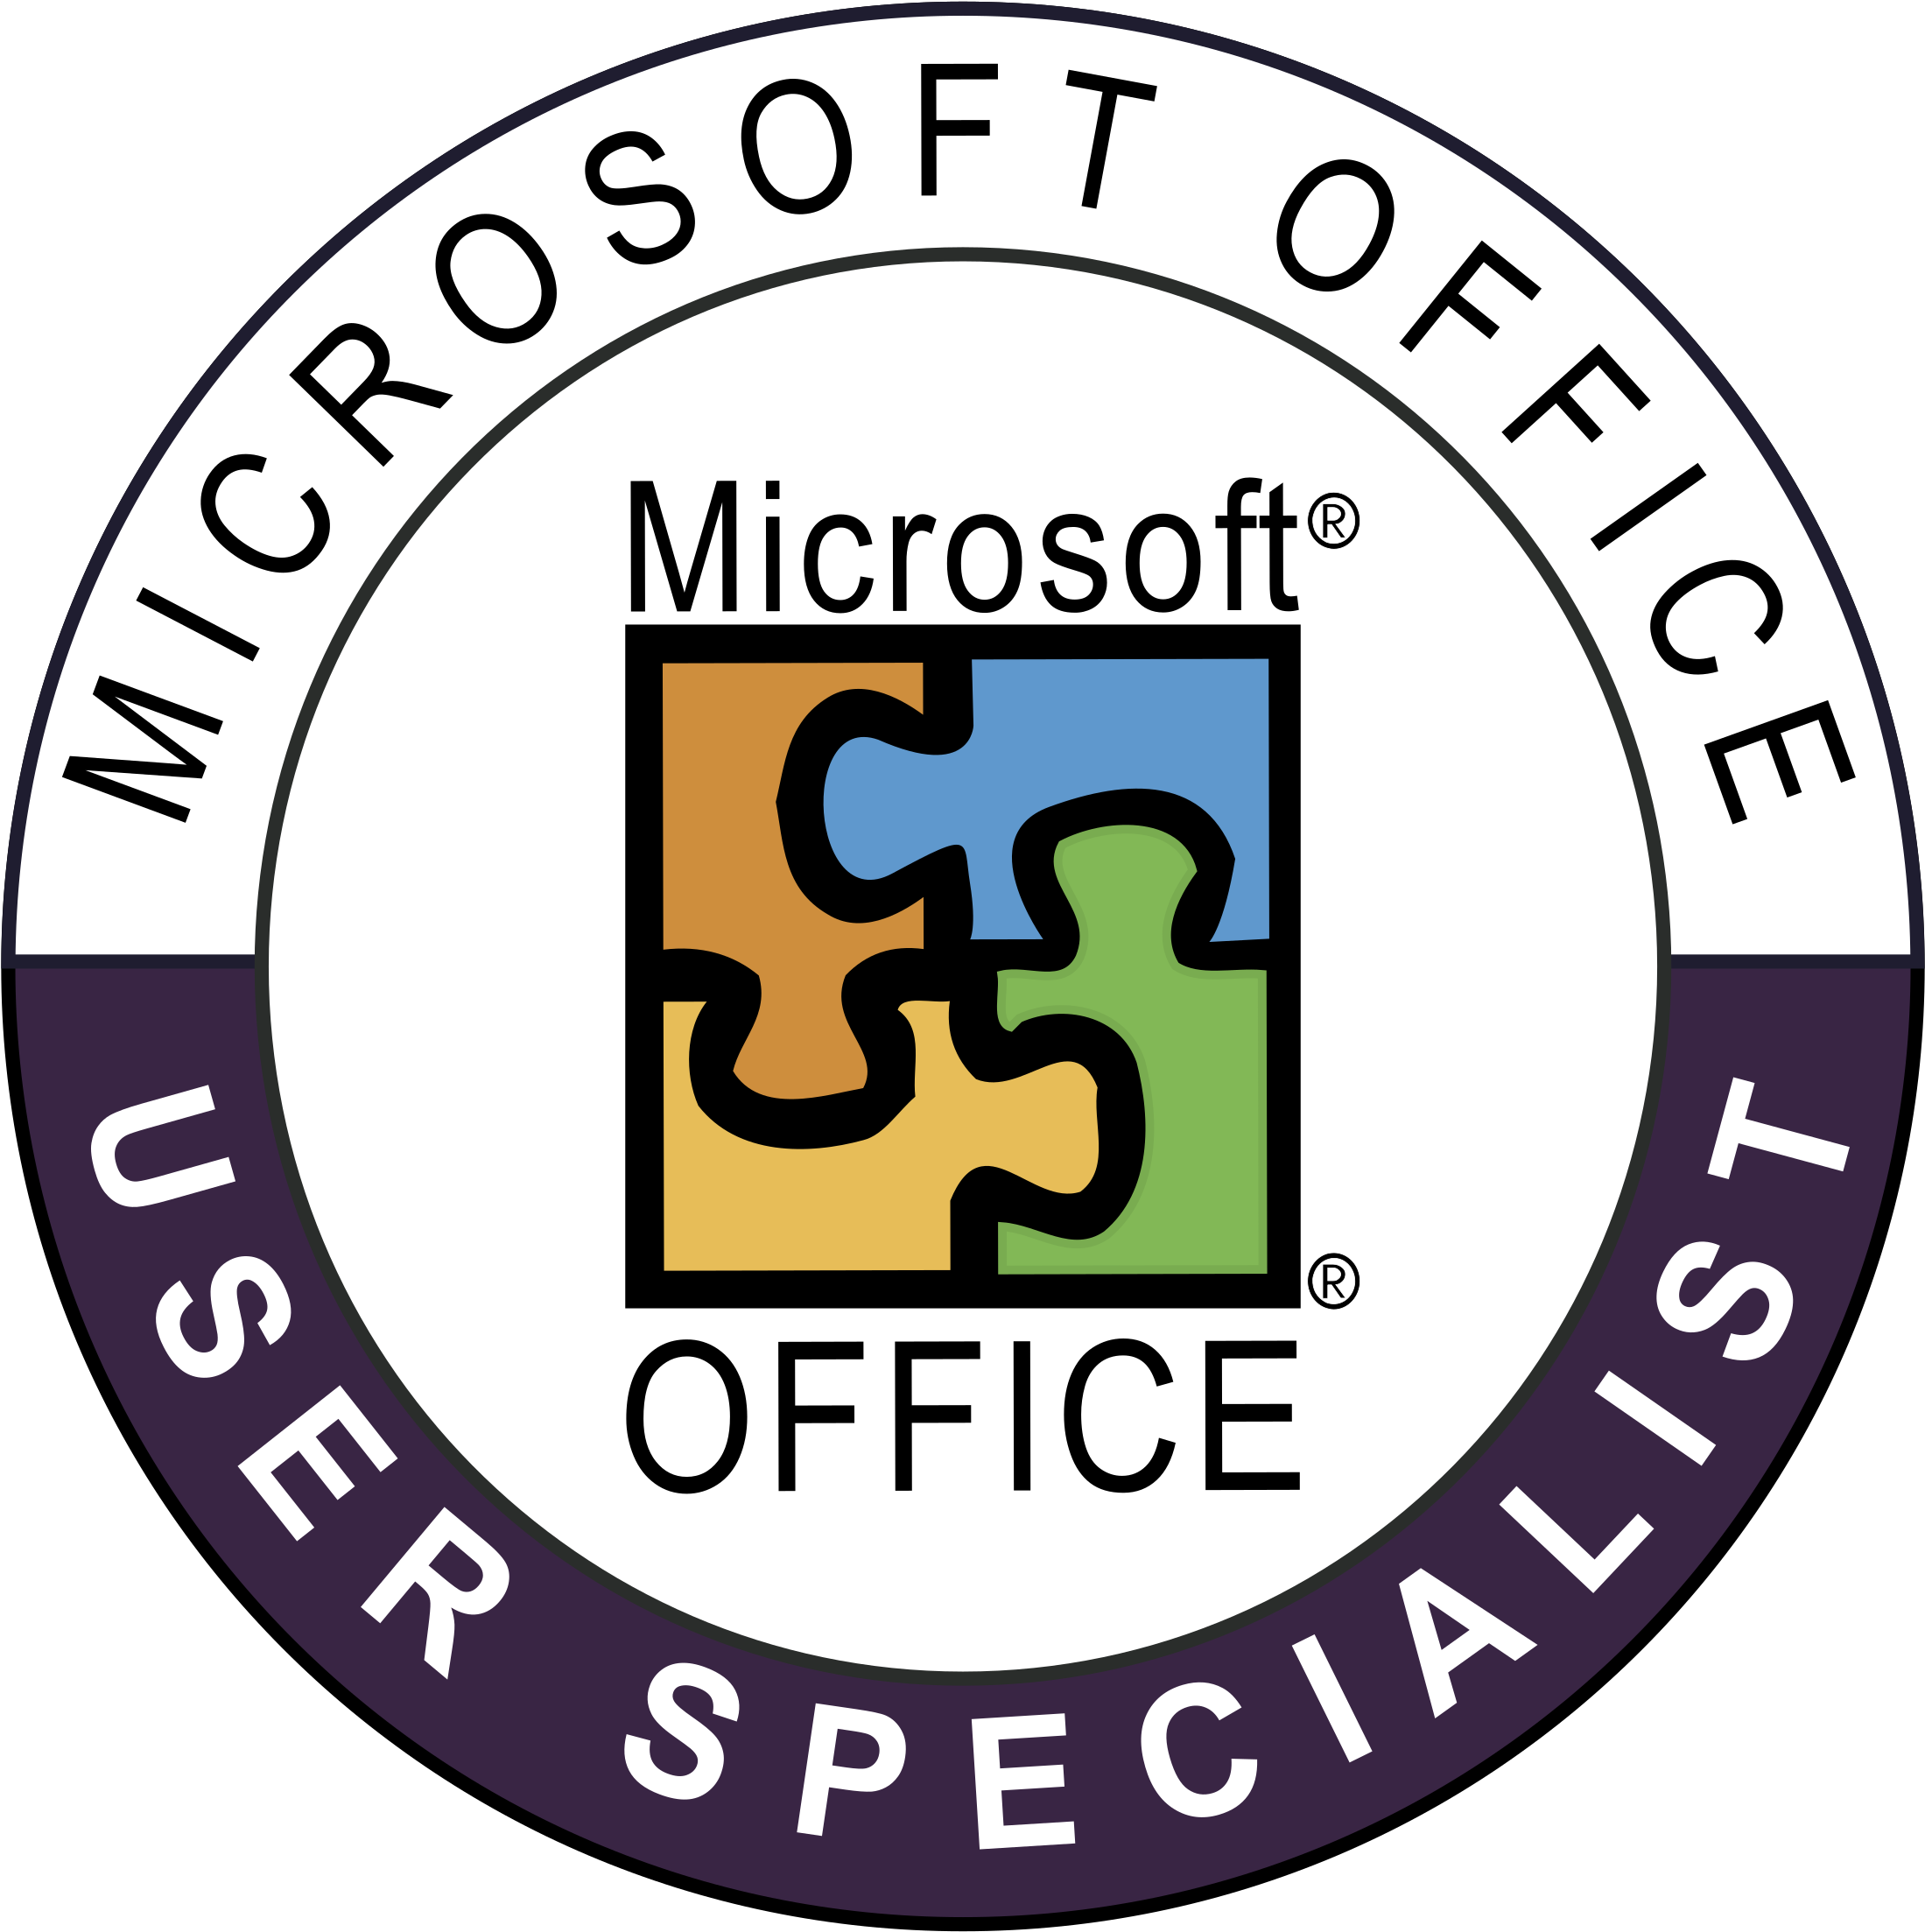 Microsoft Office User Specialist Logo Png Transparent - Microsoft Office User Specialist (2400x2400)